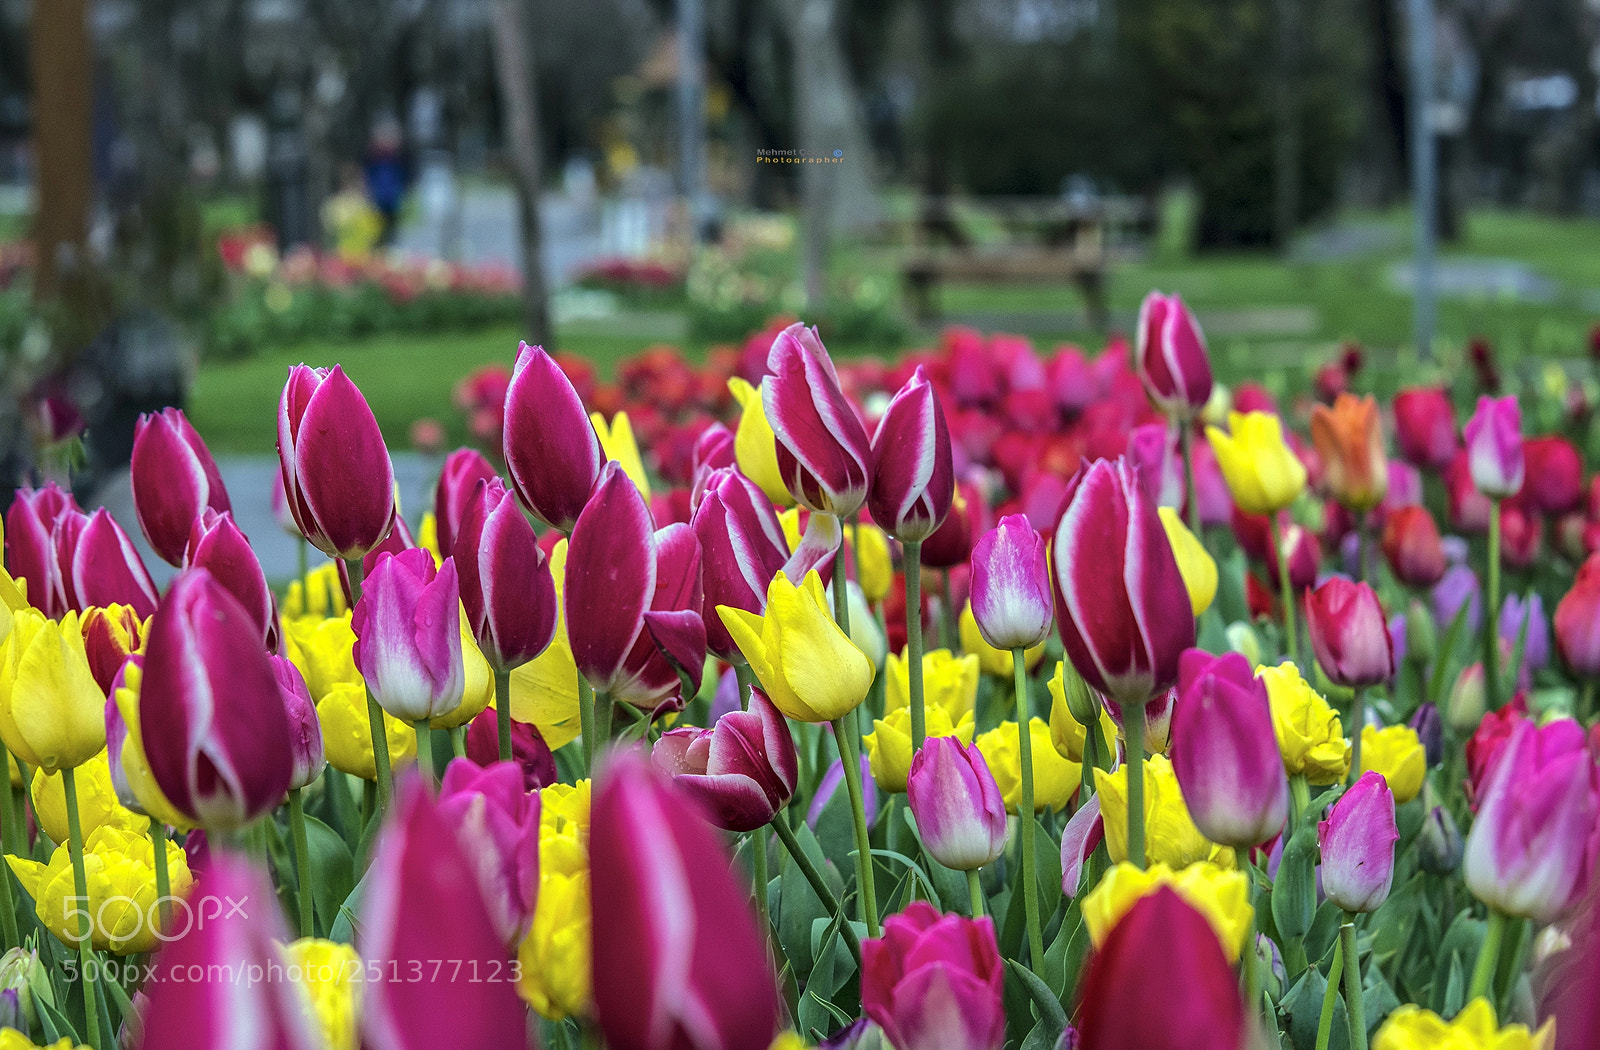 Pentax K-3 II sample photo. The gardens and tulips photography